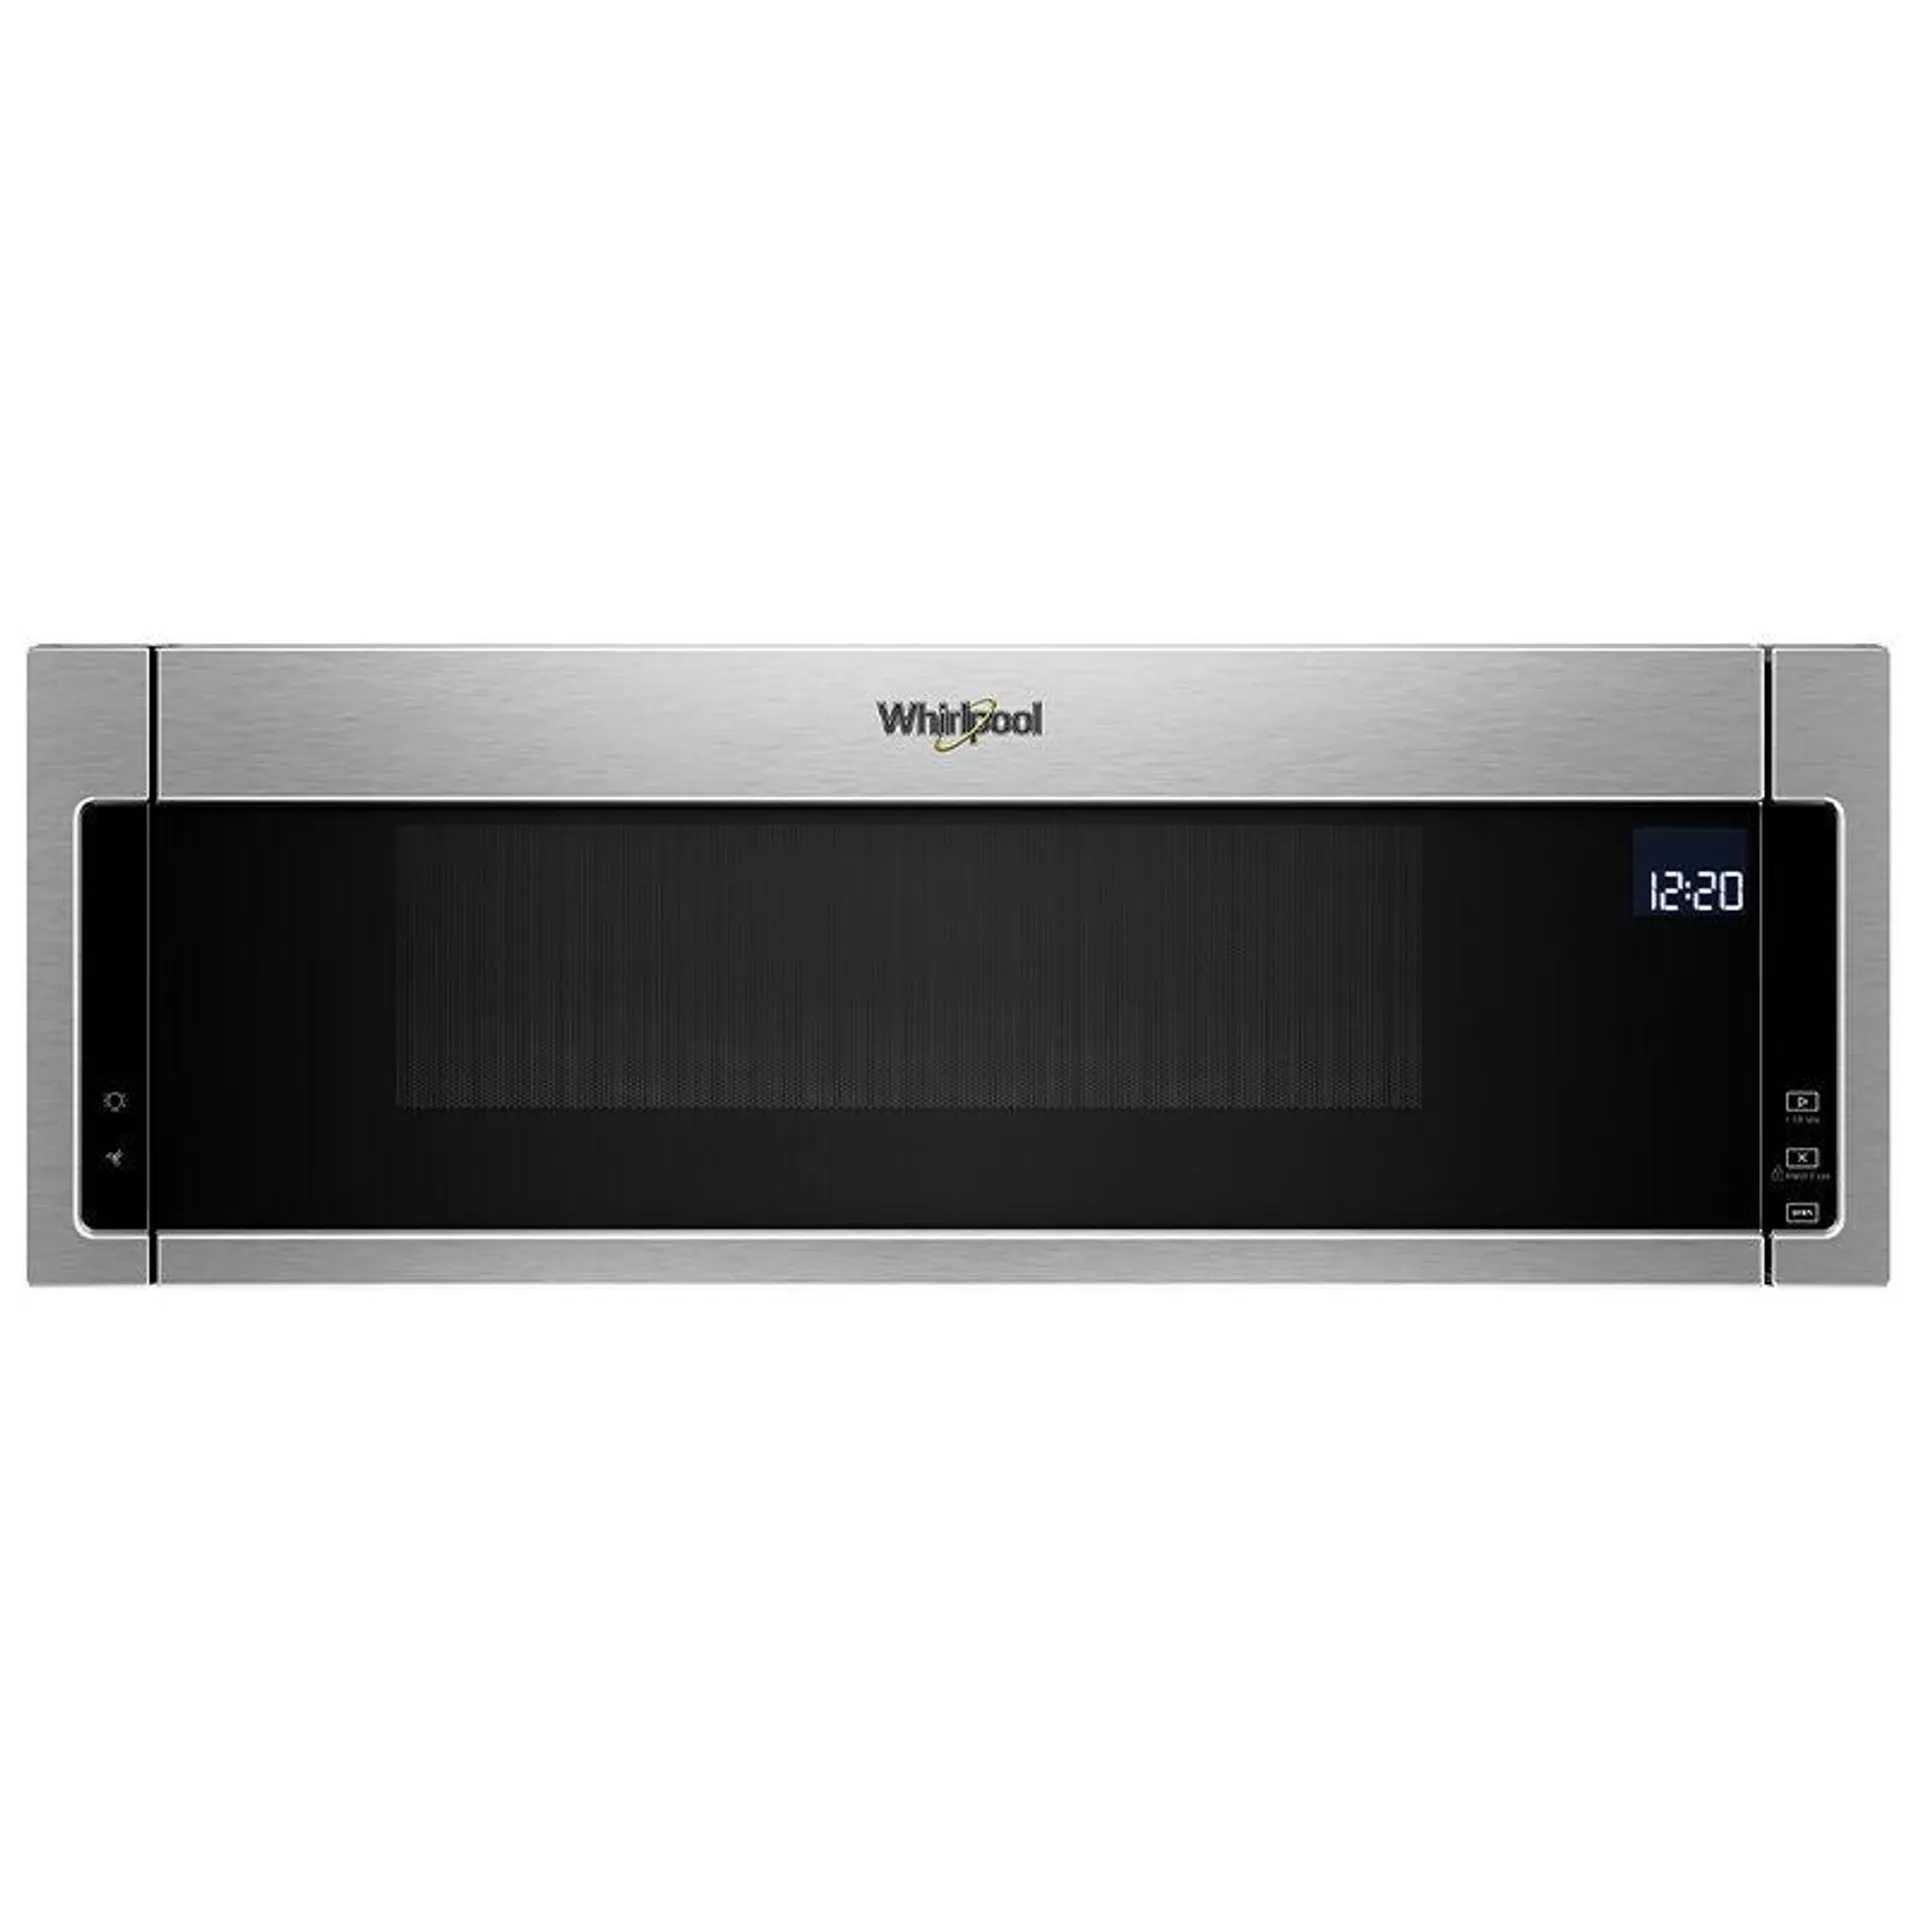 Whirlpool 30" 1.1 Cu. Ft. Over-the-Range Microwave with 10 Power Levels, 400 CFM & Sensor Cooking Controls - Fingerprint Resistant Stainless Steel